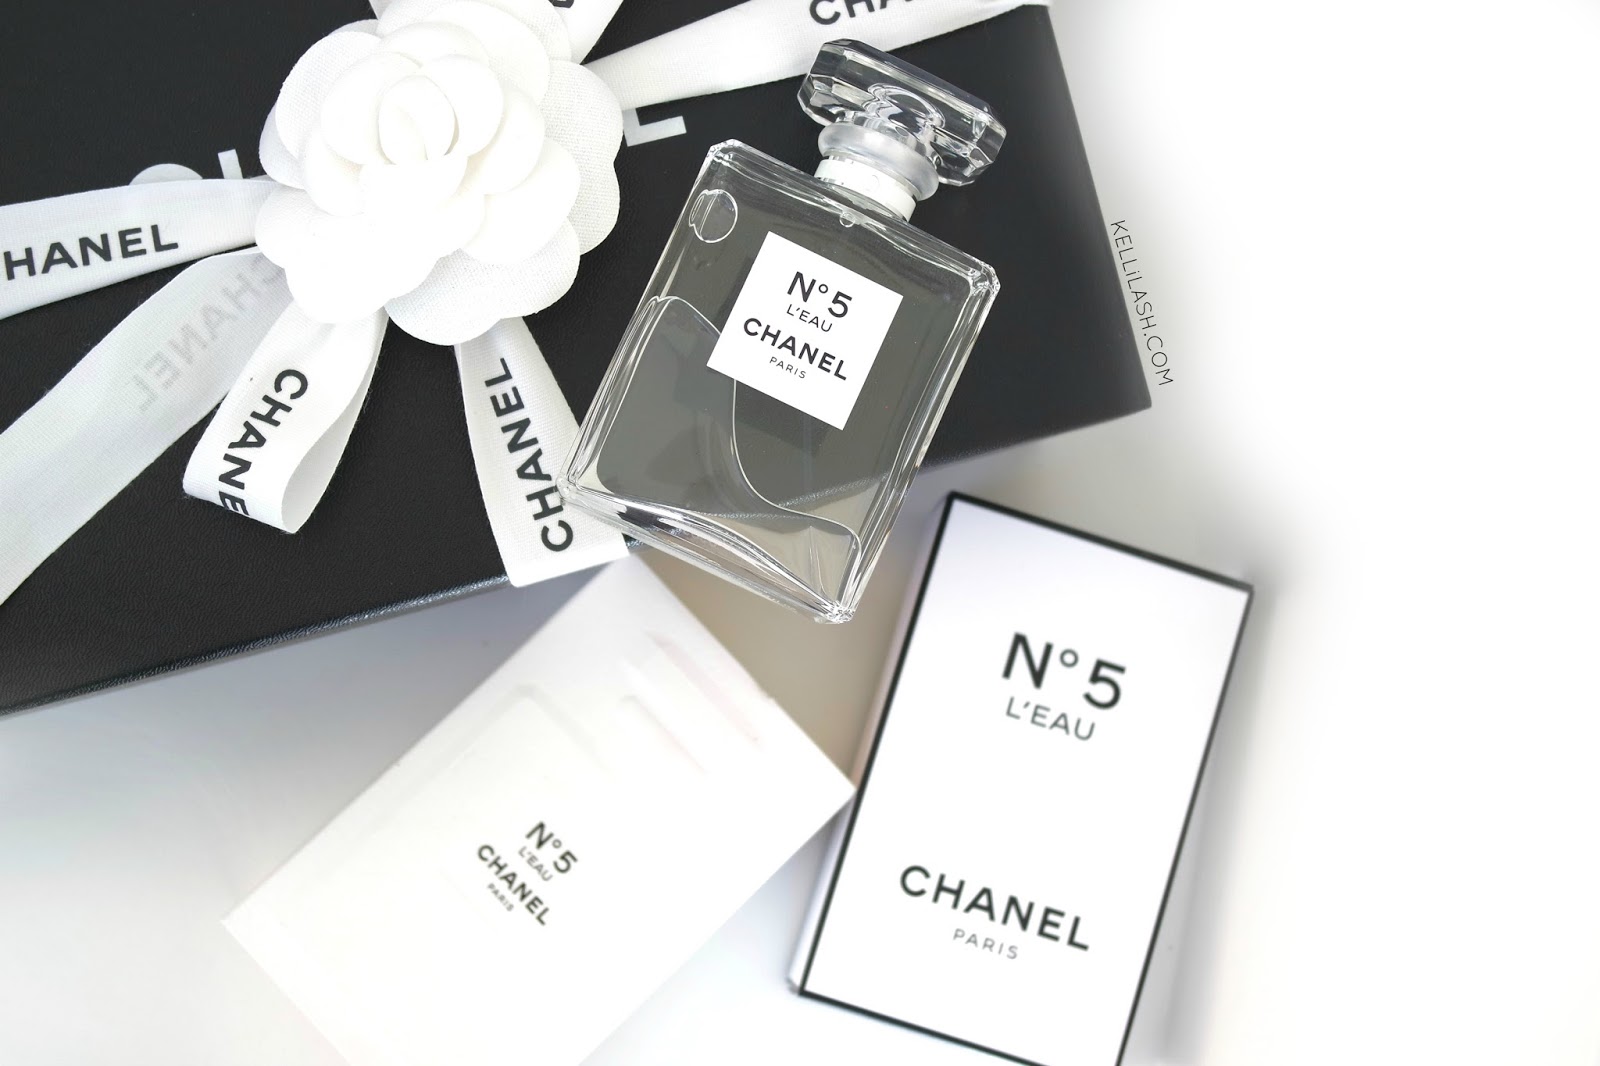 Chanel Perfume Is a Great Gift Idea—Even Better If It's Limited Edition